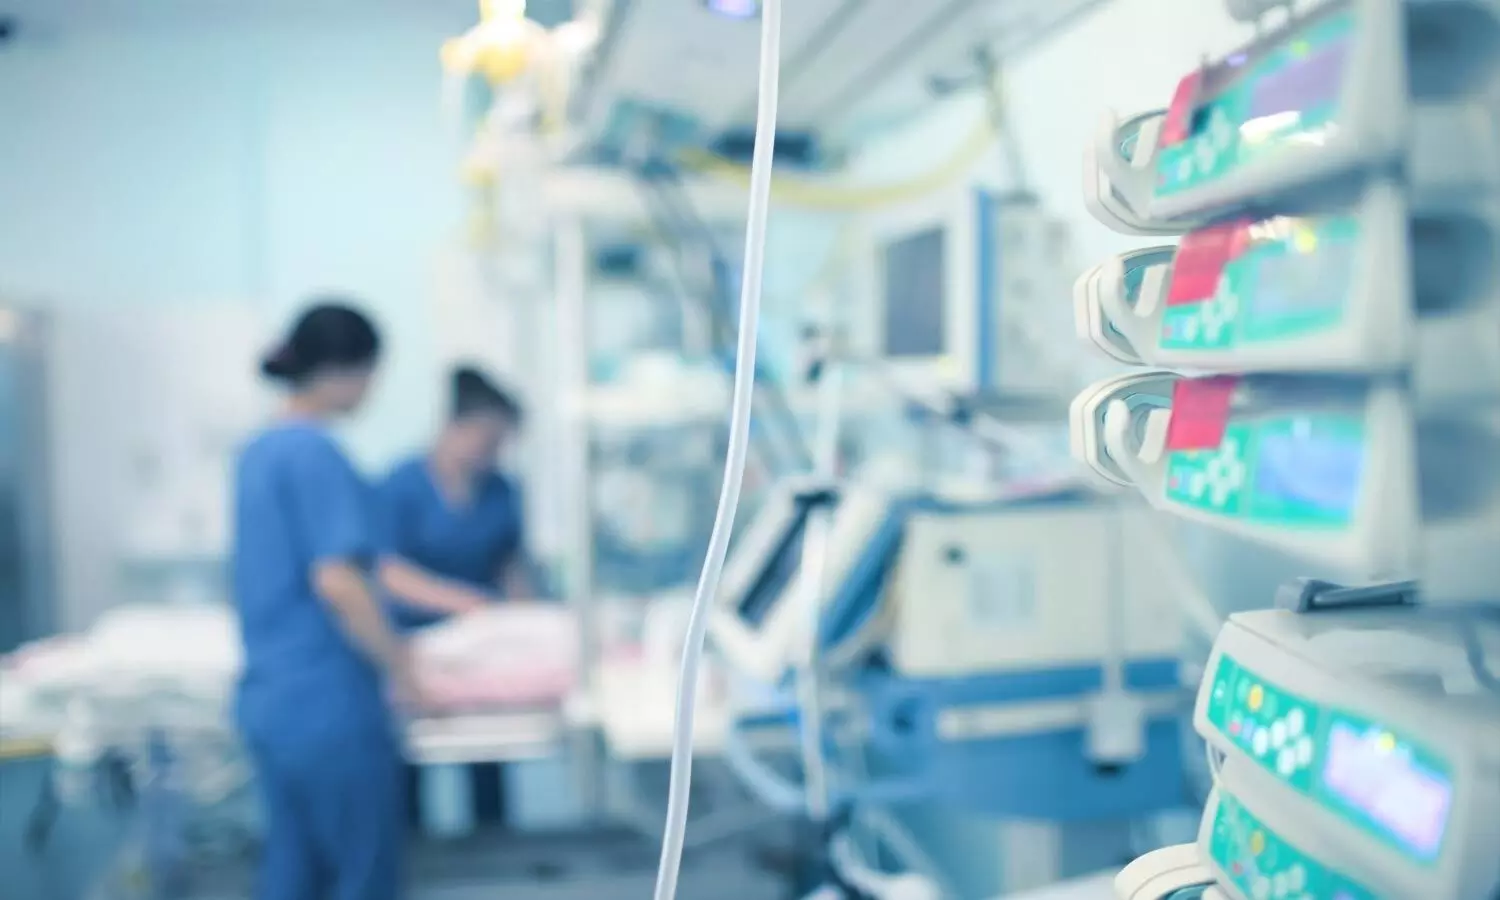 Early mobilization in ICU may not reduce mortality or hospital stay: NEJM